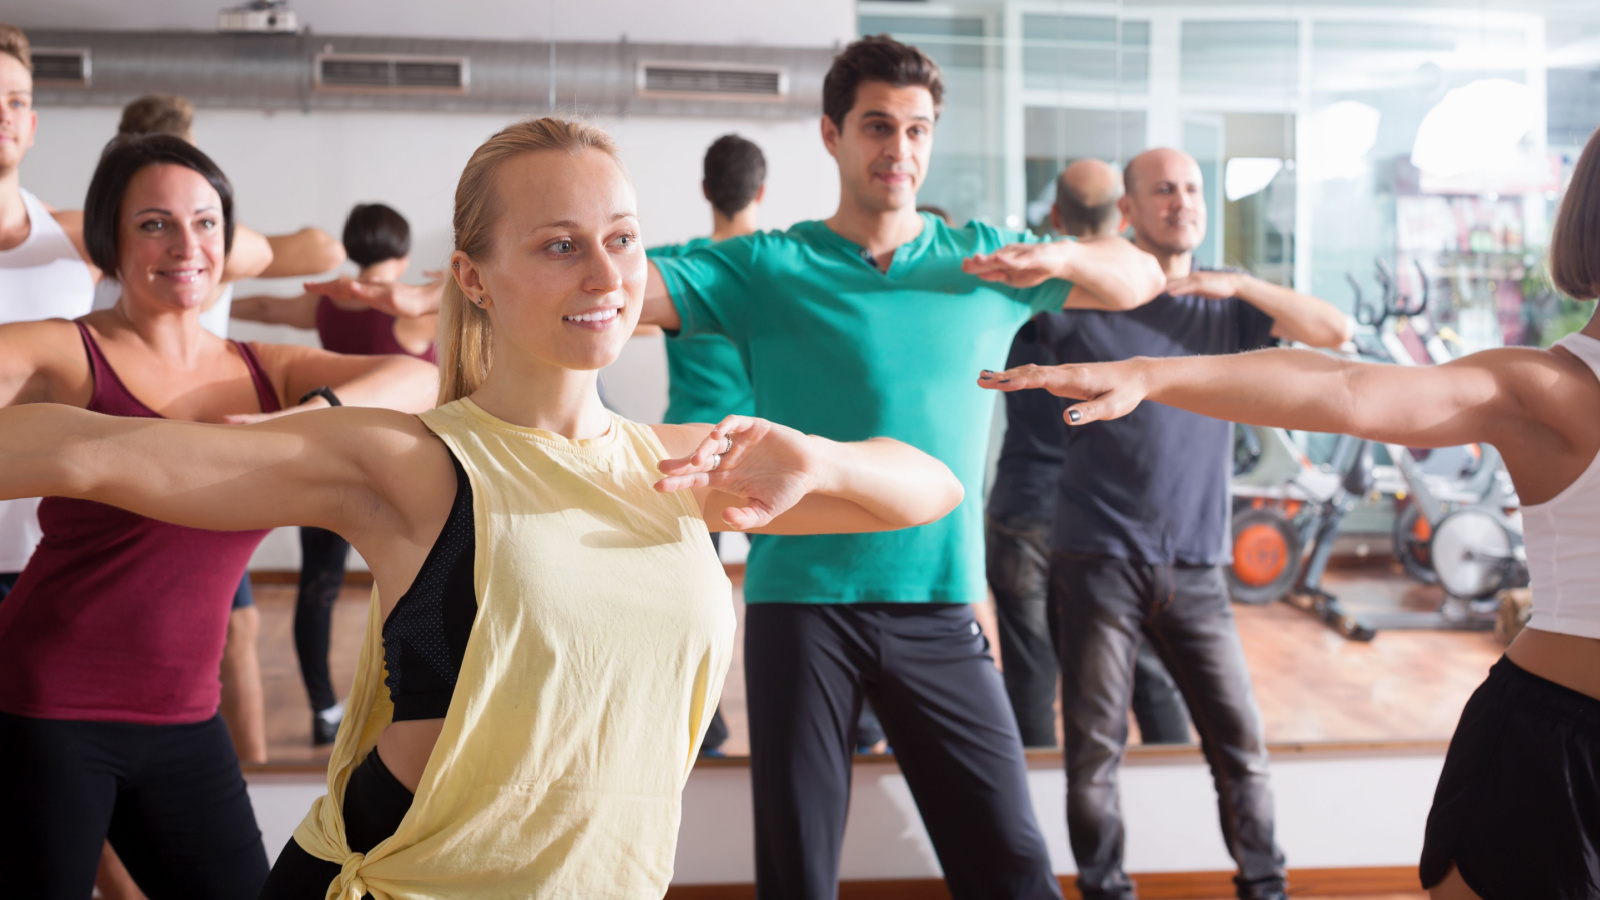 image credit: BearFotos/Shutterstock <p><span>Shake things up with Zumba, a dance-fitness program tailored to be fun and accessible yet still provide a great workout. Dance to a variety of rhythms and enjoy a sense of community and exhilaration. It’s a party that also happens to be great for your health!</span></p>